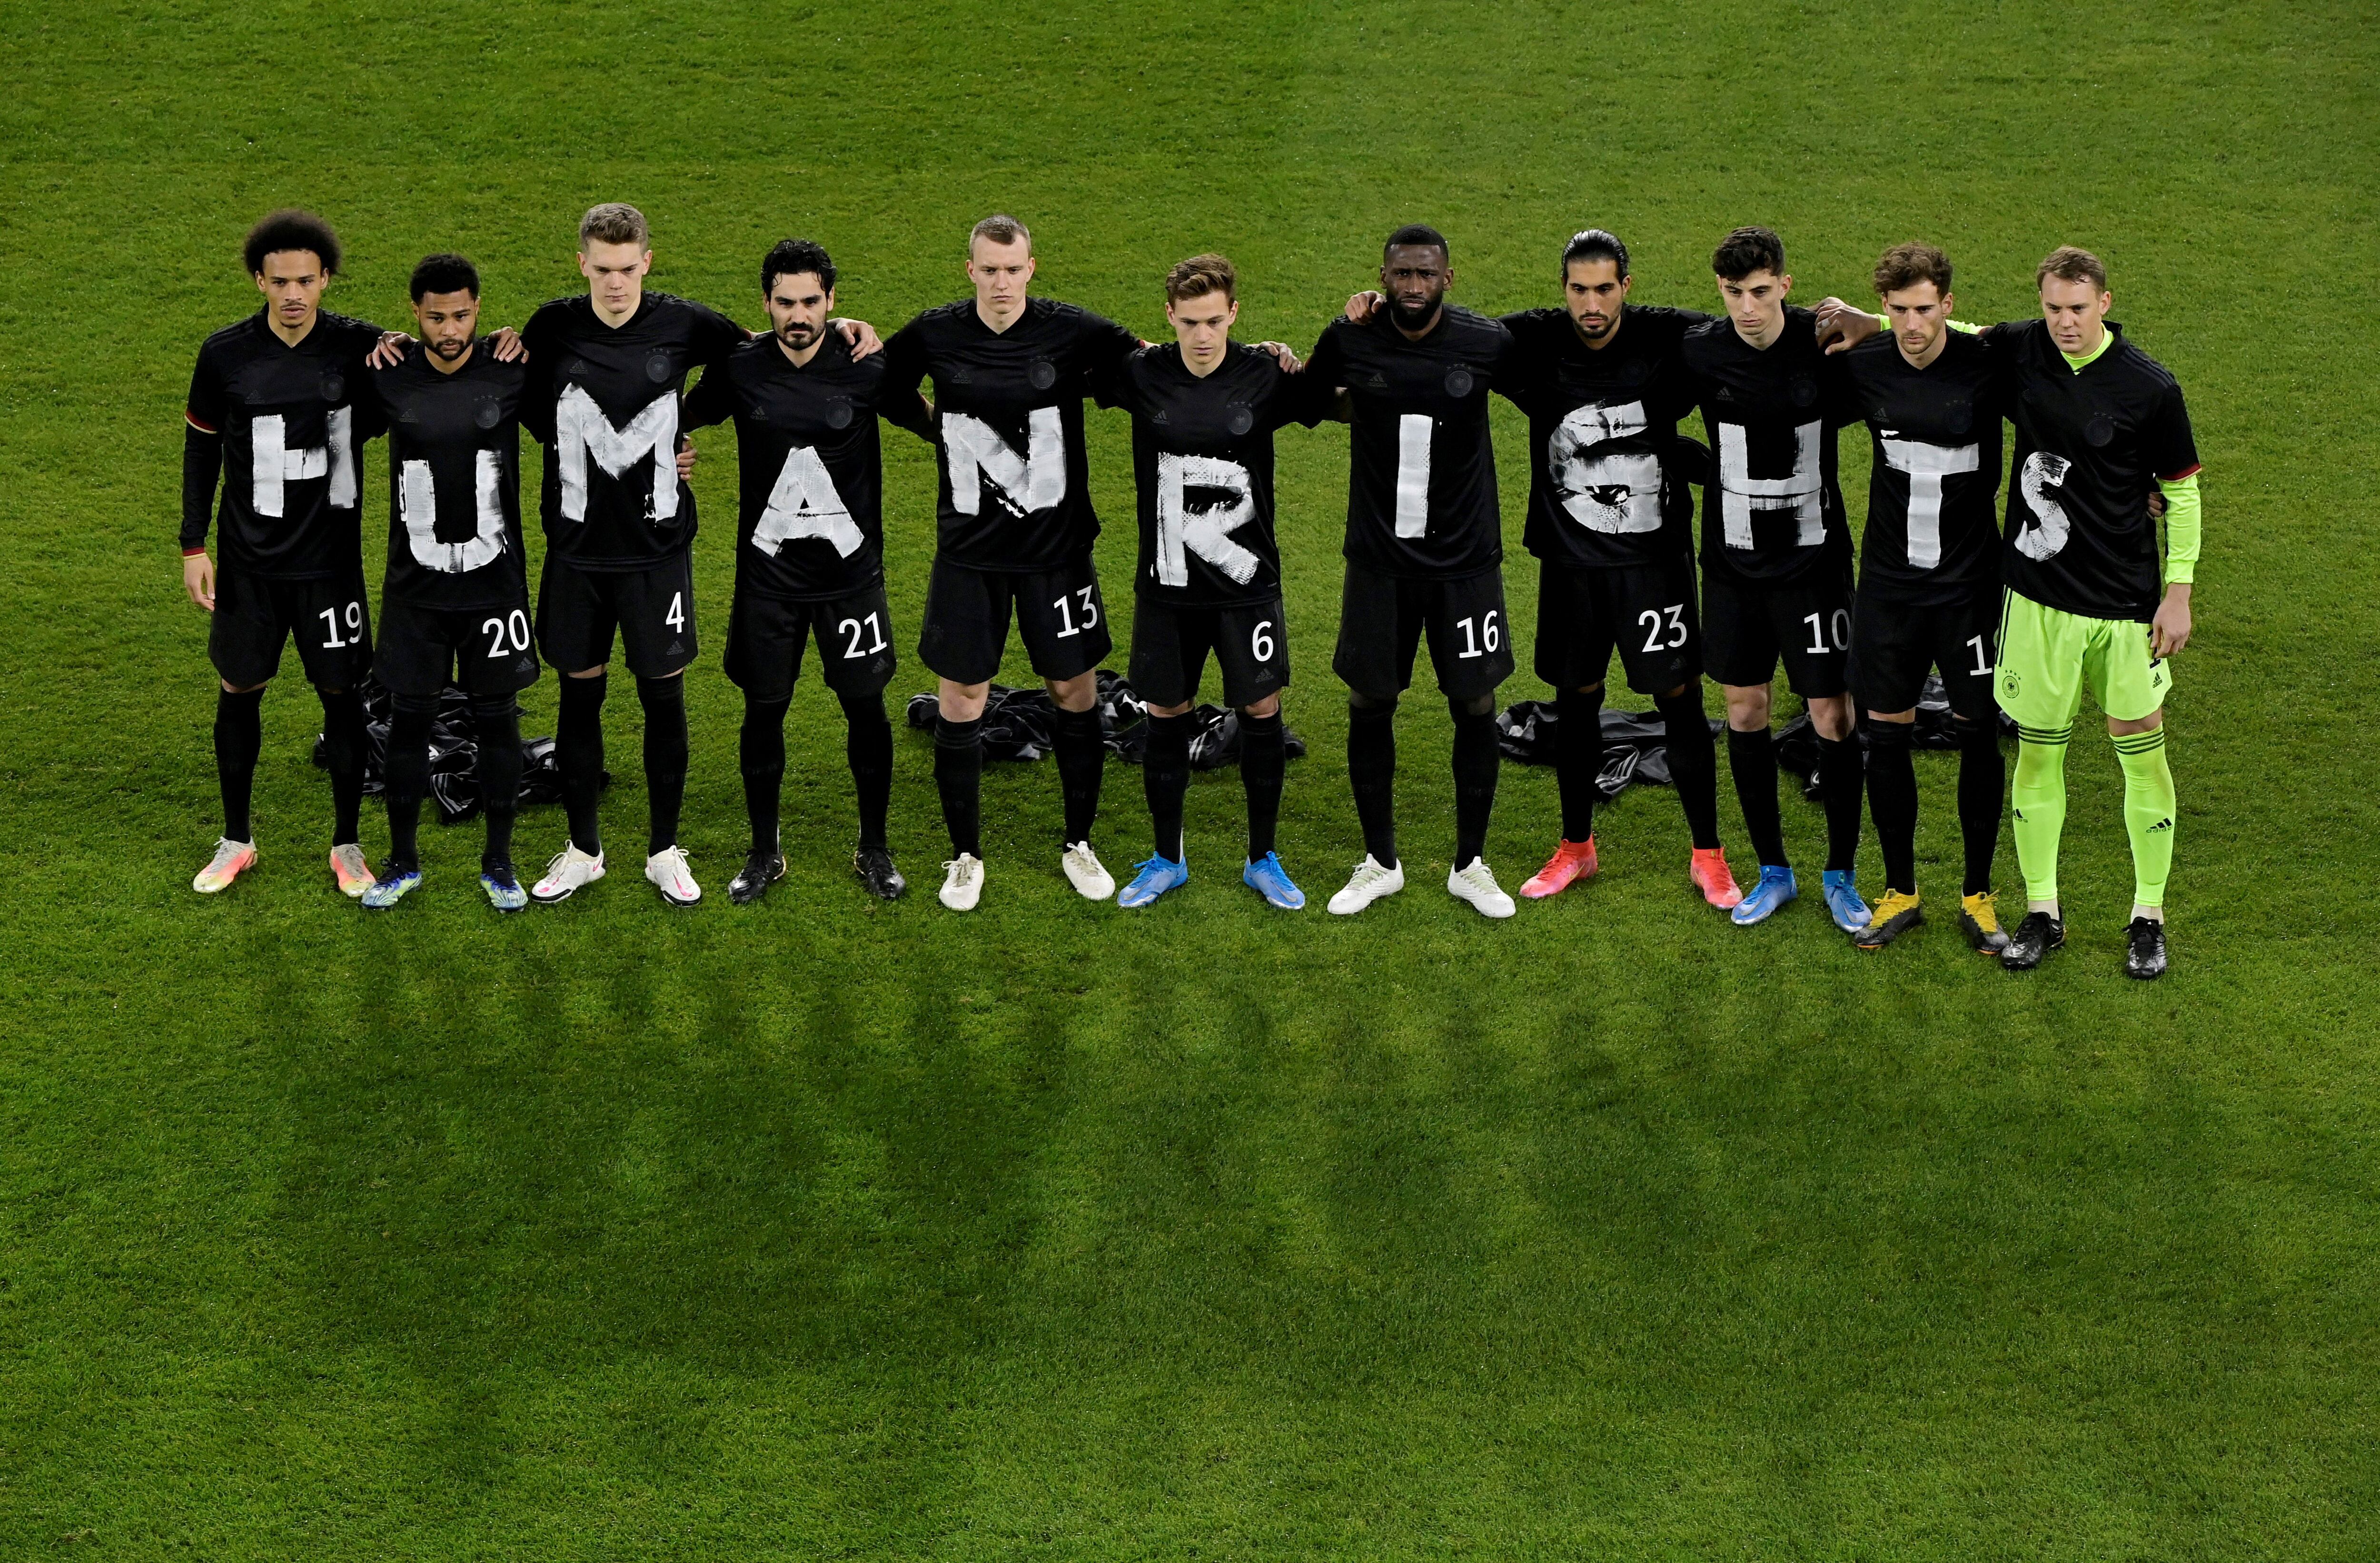 Germany's players posed for a photo displaying a Human Rights message on their jerseys before the game against Iceland (Photo: Reuters)